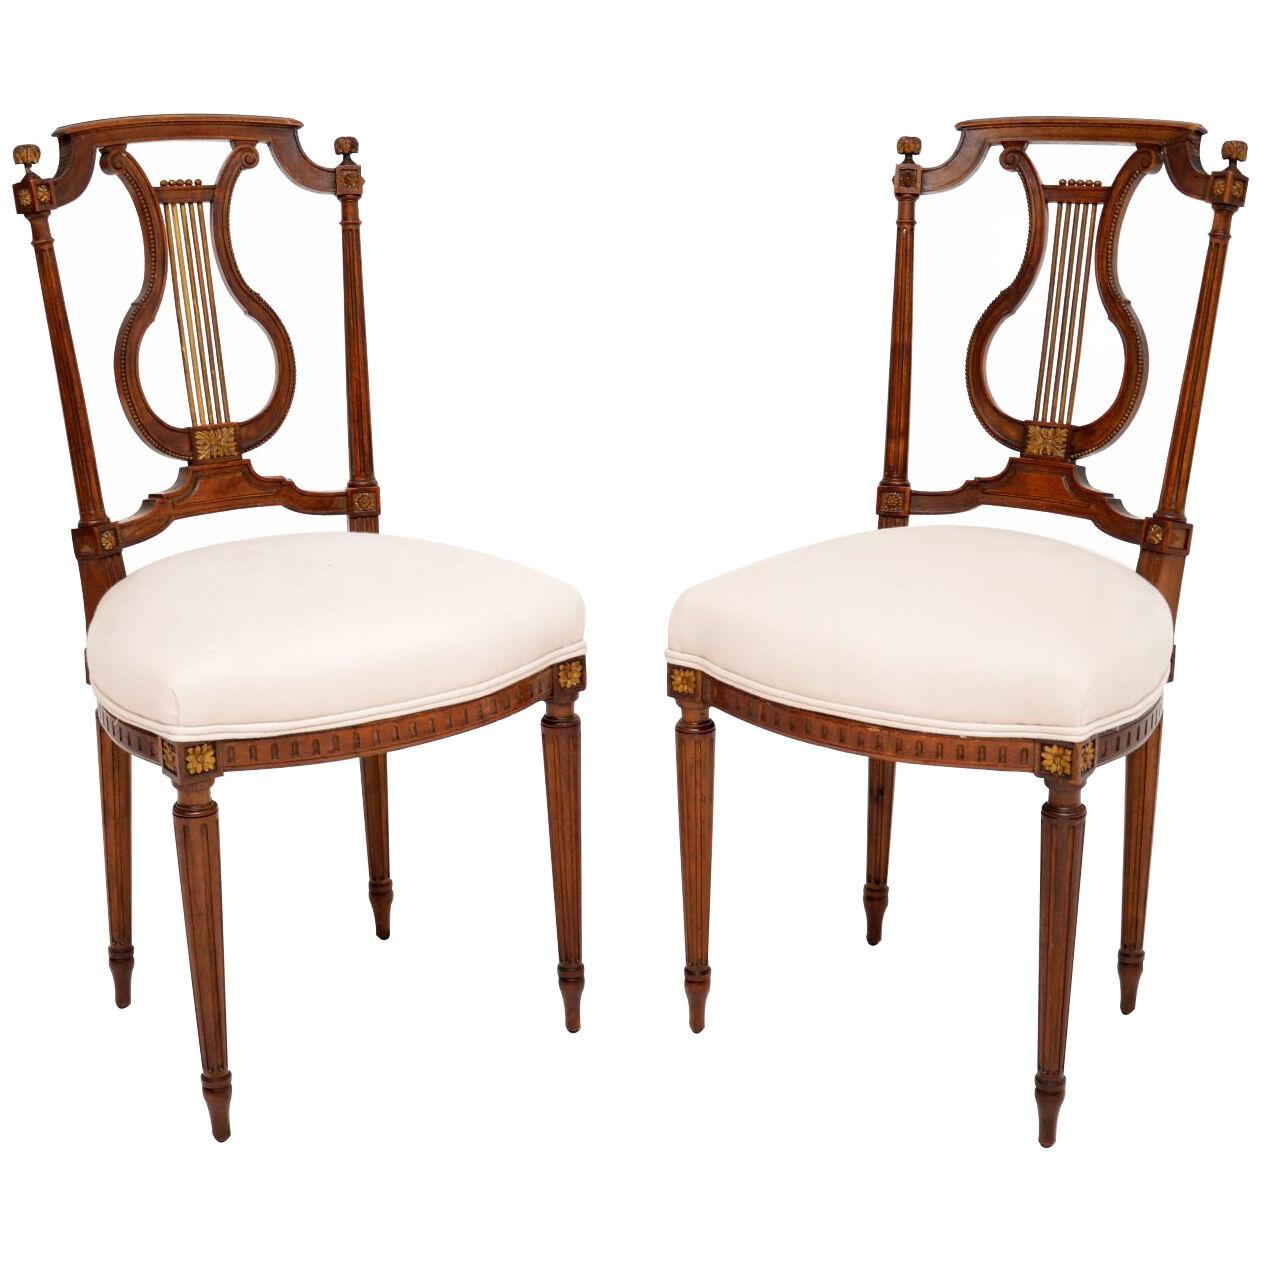 Pair of Antique Regency Mahogany Side Chairs